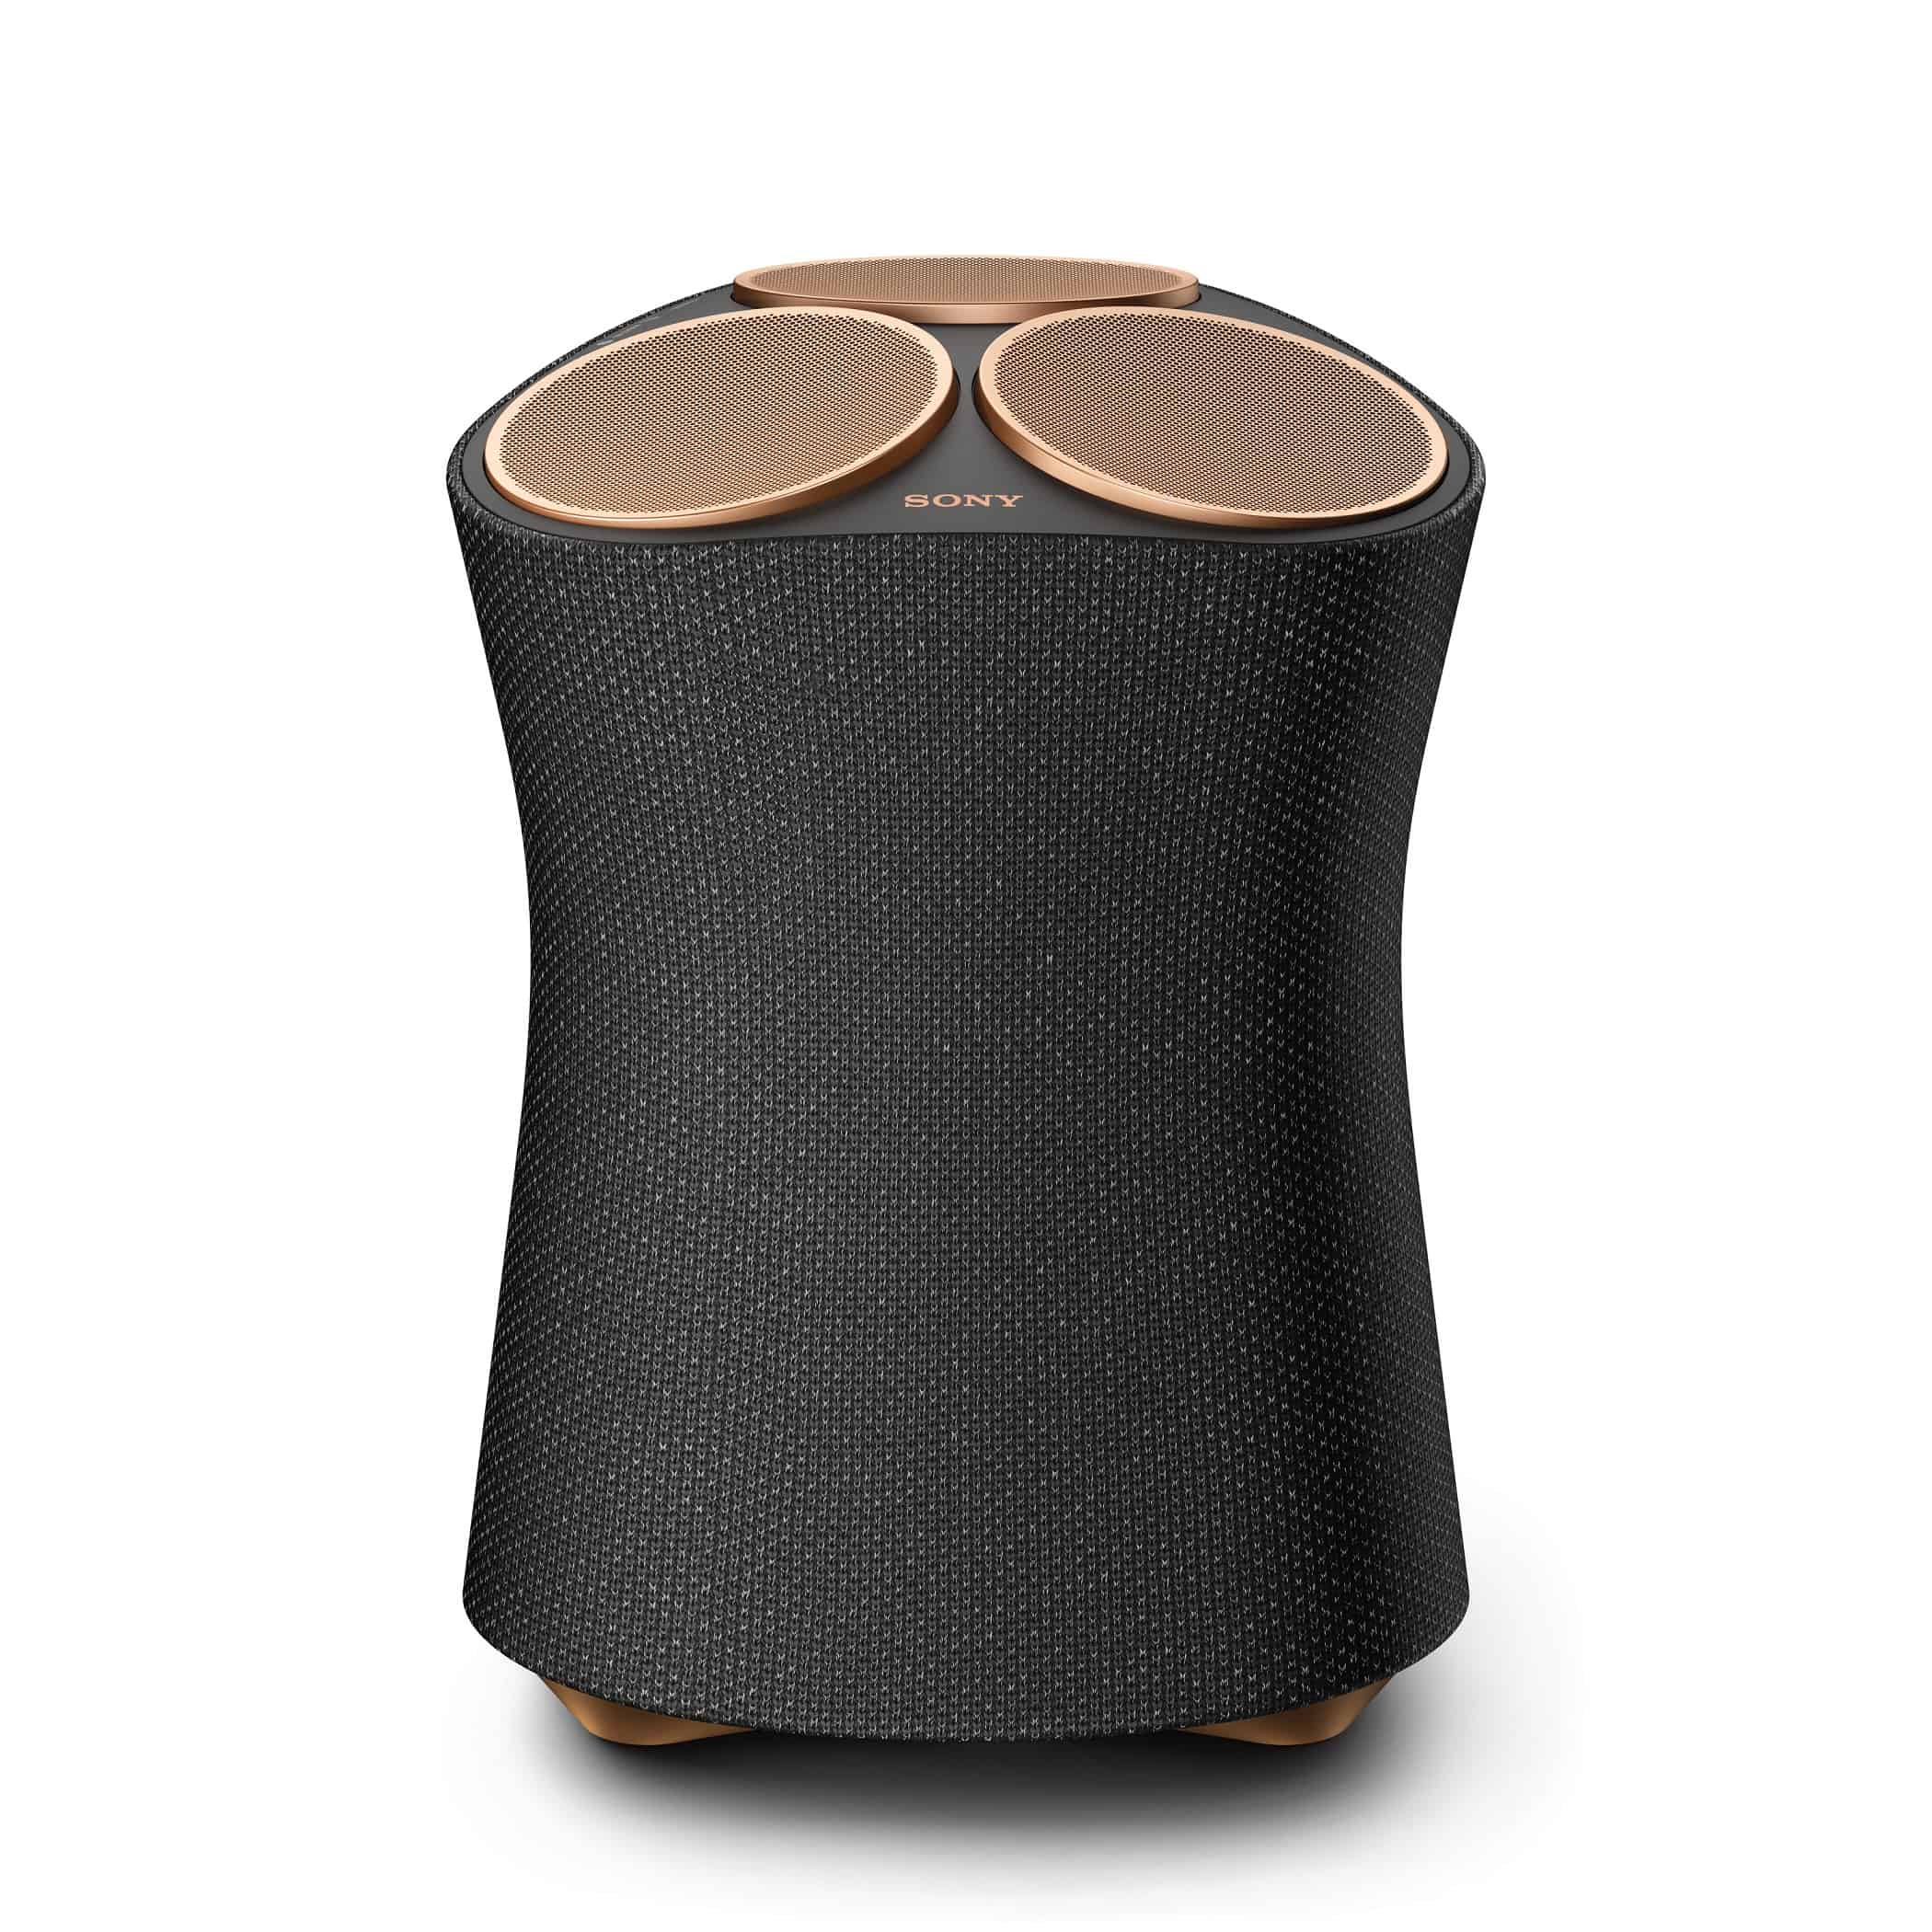 Unique Spatial Sound Technologies for Ambient Room-filling Sound with Sony’s Latest Premium Wireless Speakers